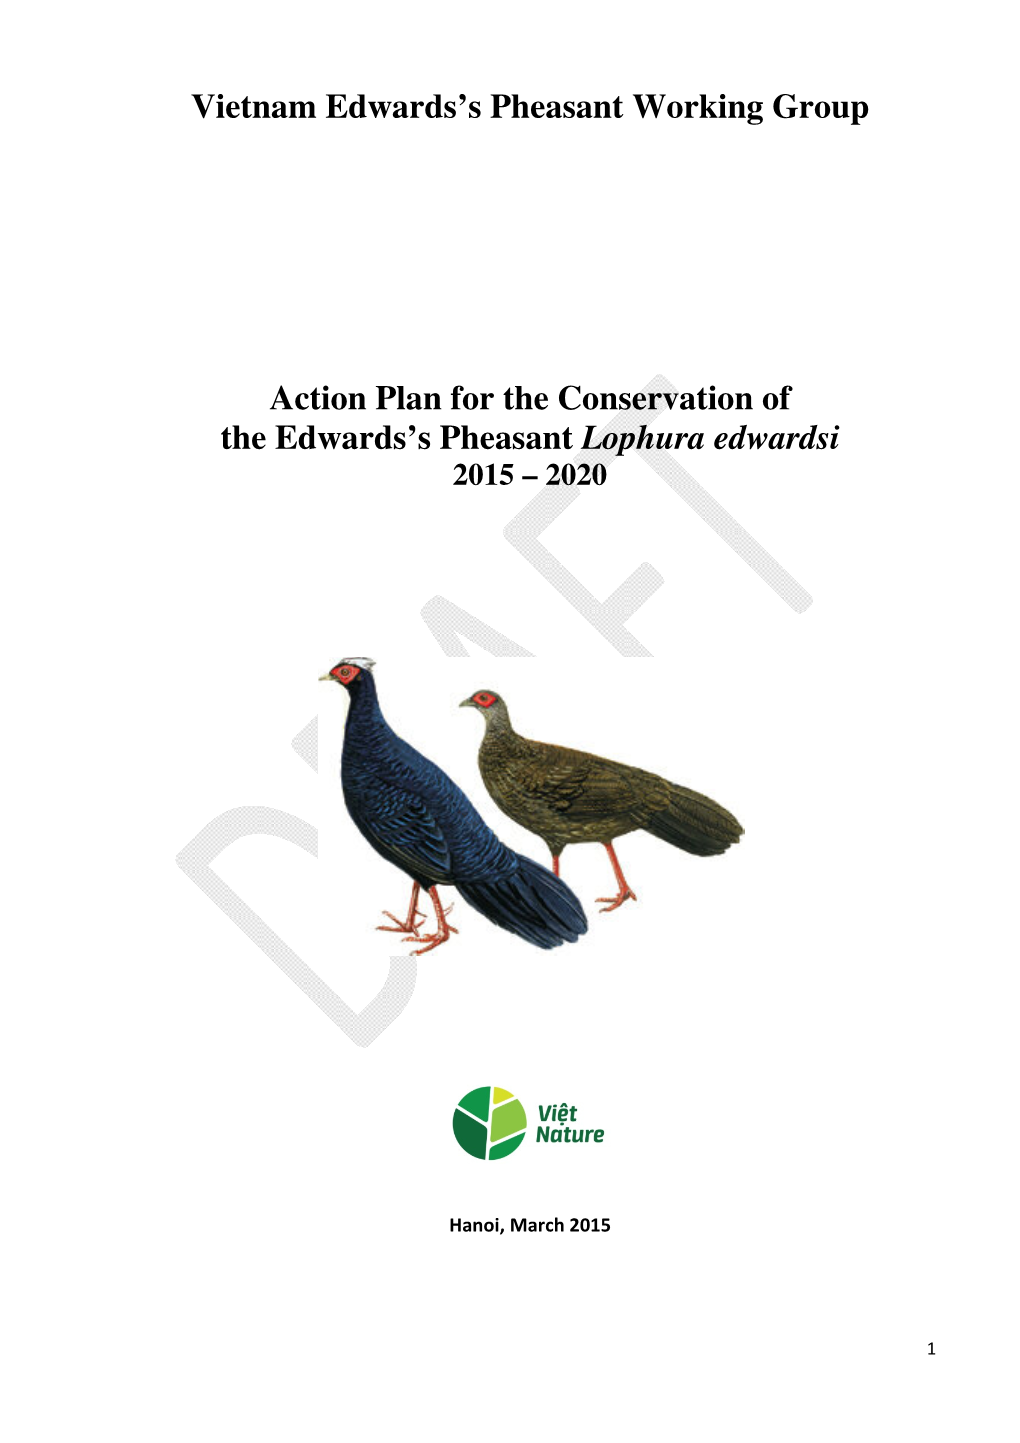 Vietnam Edwards's Pheasant Working Group Action Plan for The